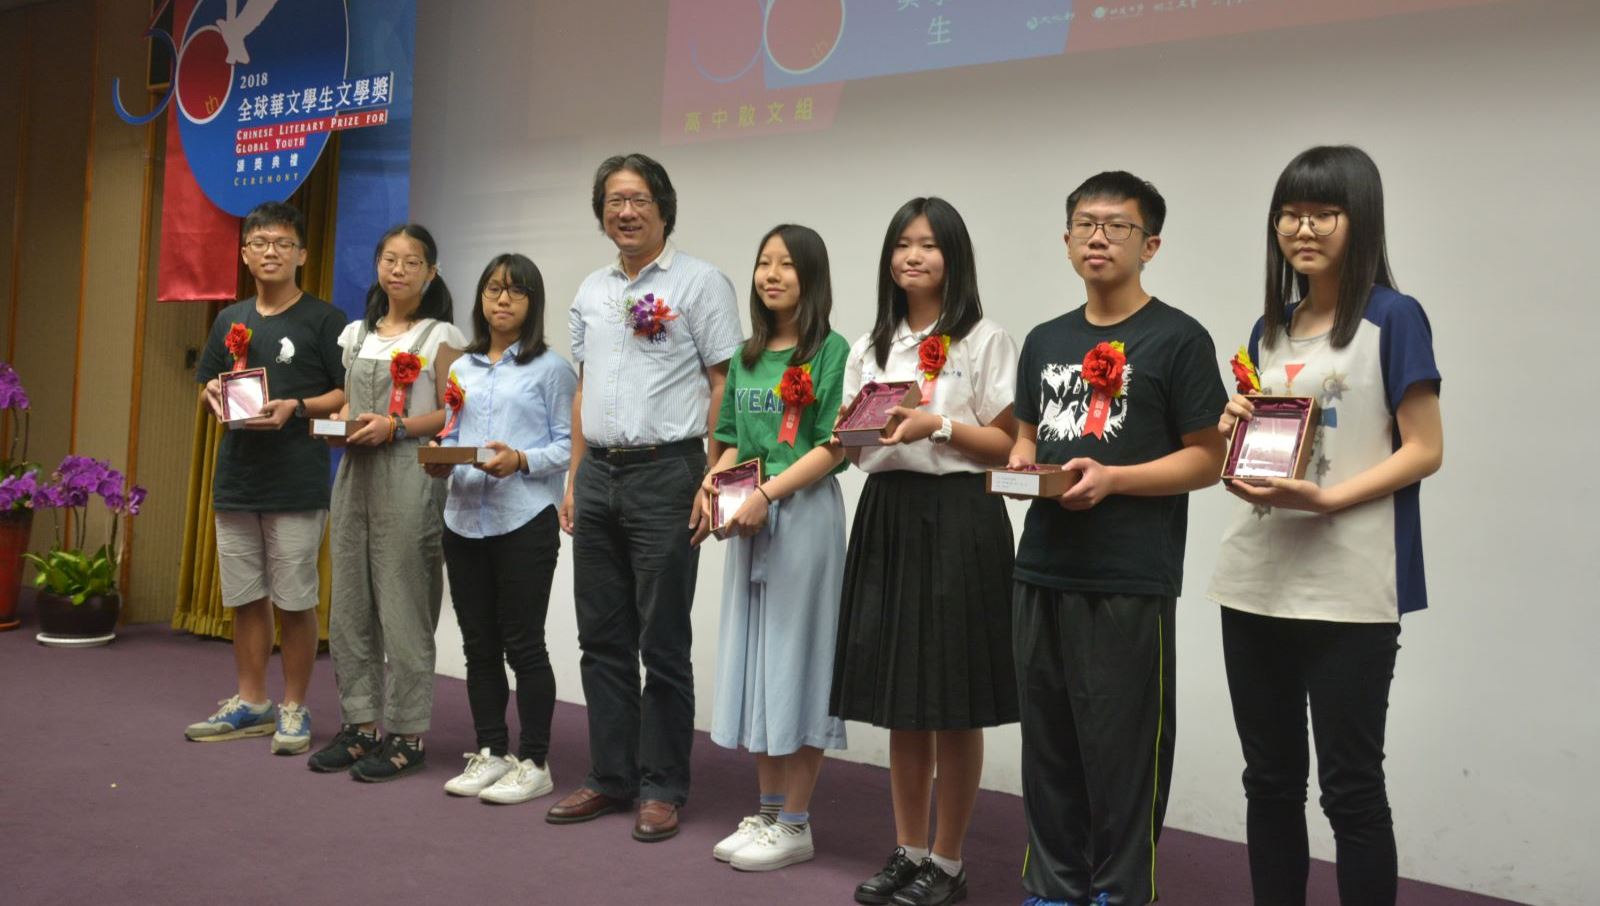 USI Has Been Sponsored the Chinese Literary Prize for Global Youth for 11 Consecutive Years to Discover a New Star in Chinese Literary Creation